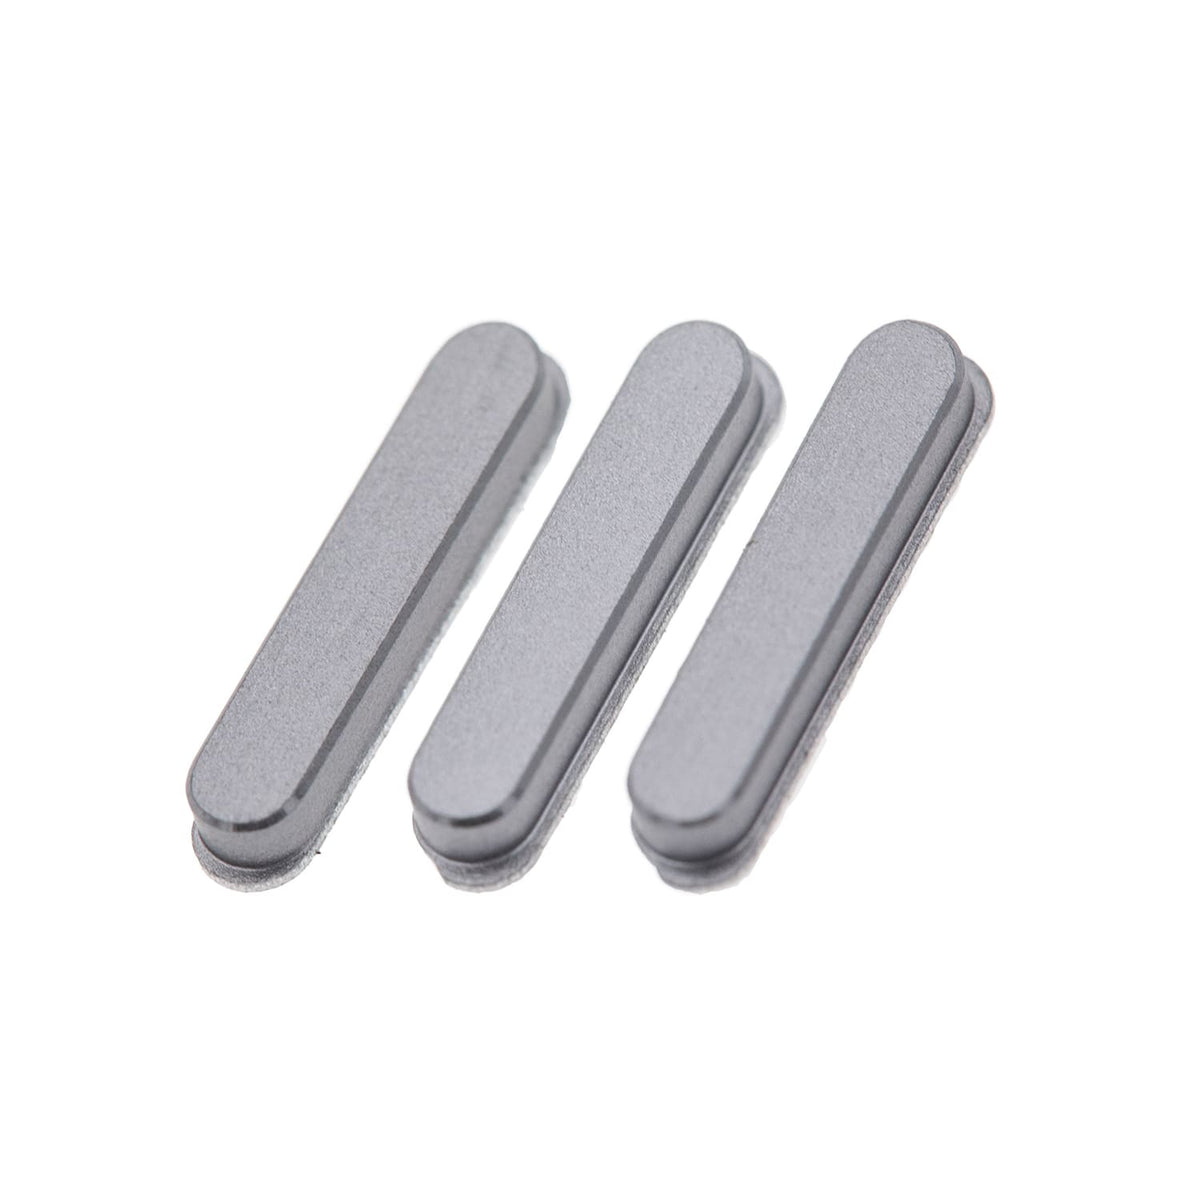 SIDE BUTTON SET FOR IPAD PRO 10.5/12.9 2ND/AIR 3 (3PCS/SET) - GREY